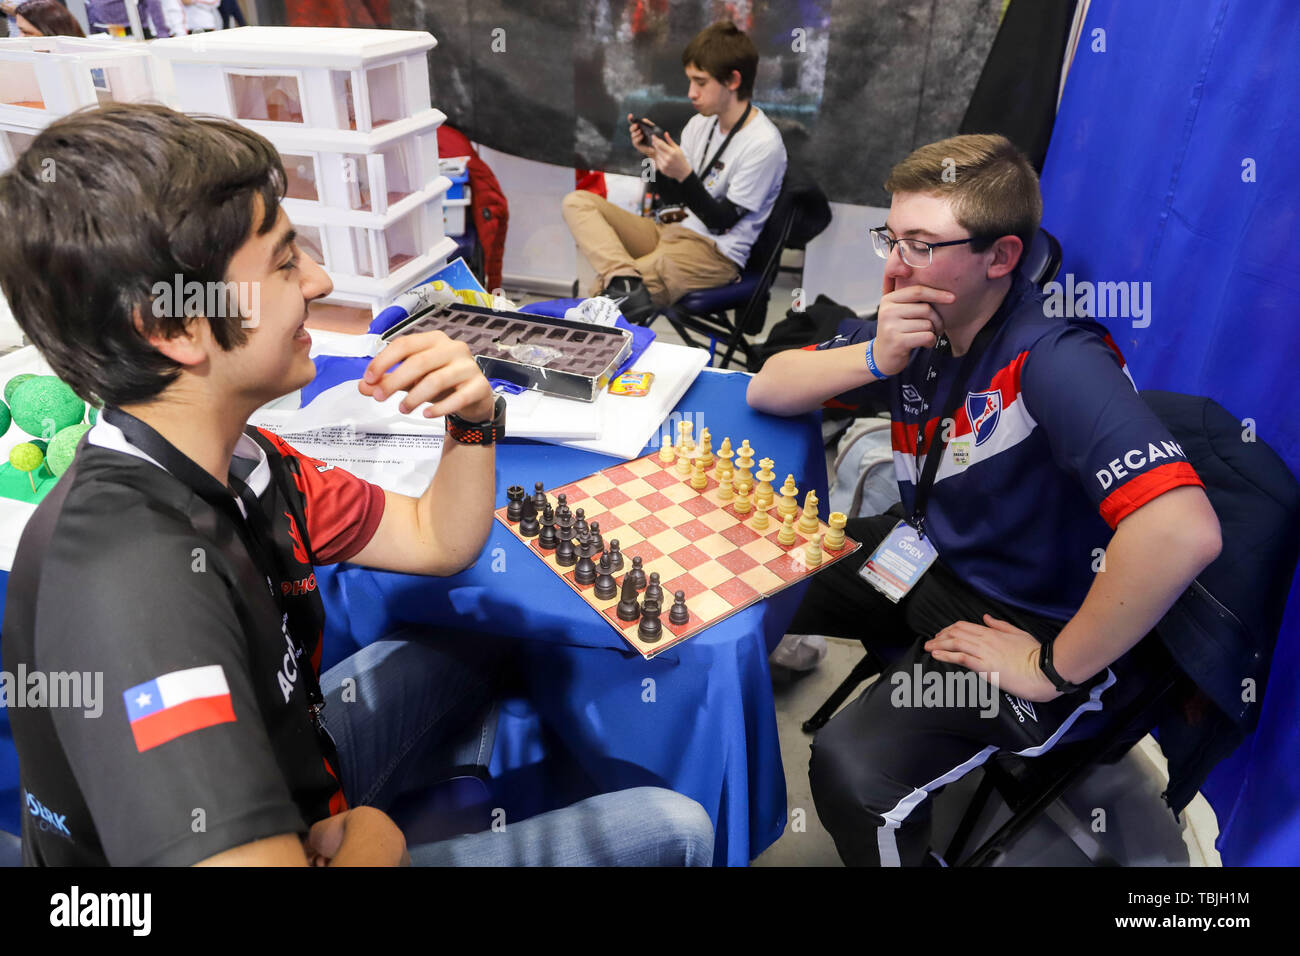 Montevideo, Uruguay. 01st June, 2019. Participants seen playing chess  during the robotics competition at the Antel Arena in Montevideo. For the  first time, Uruguay hosted the FIRST LEGO League OPEN 2019 at